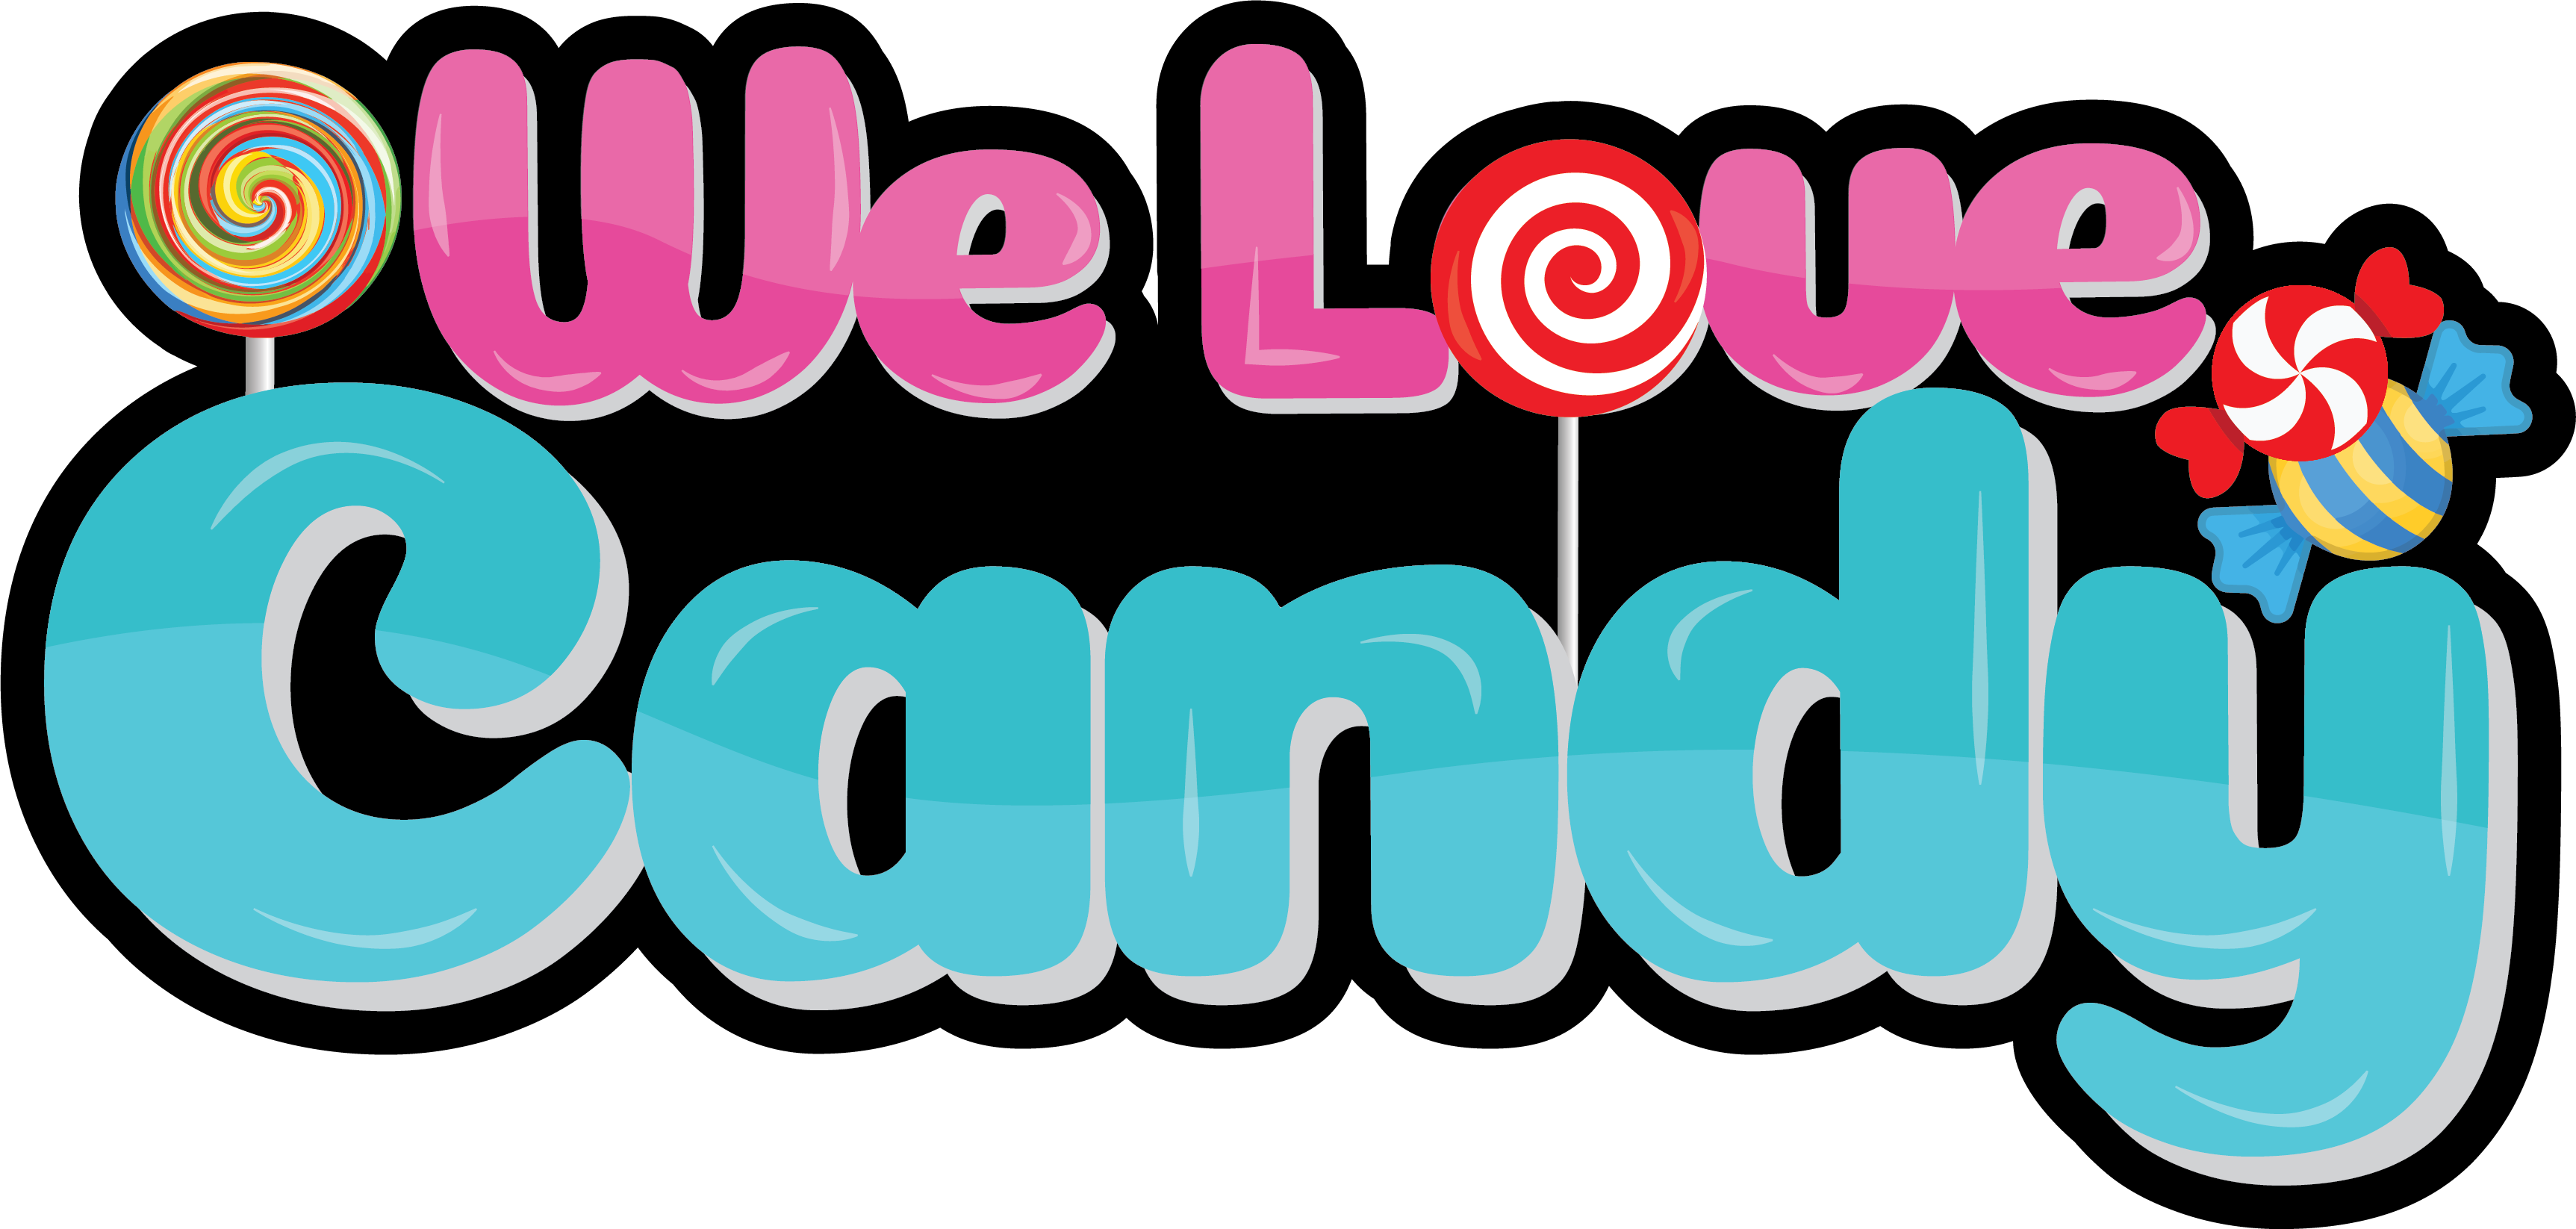 We Love Candy